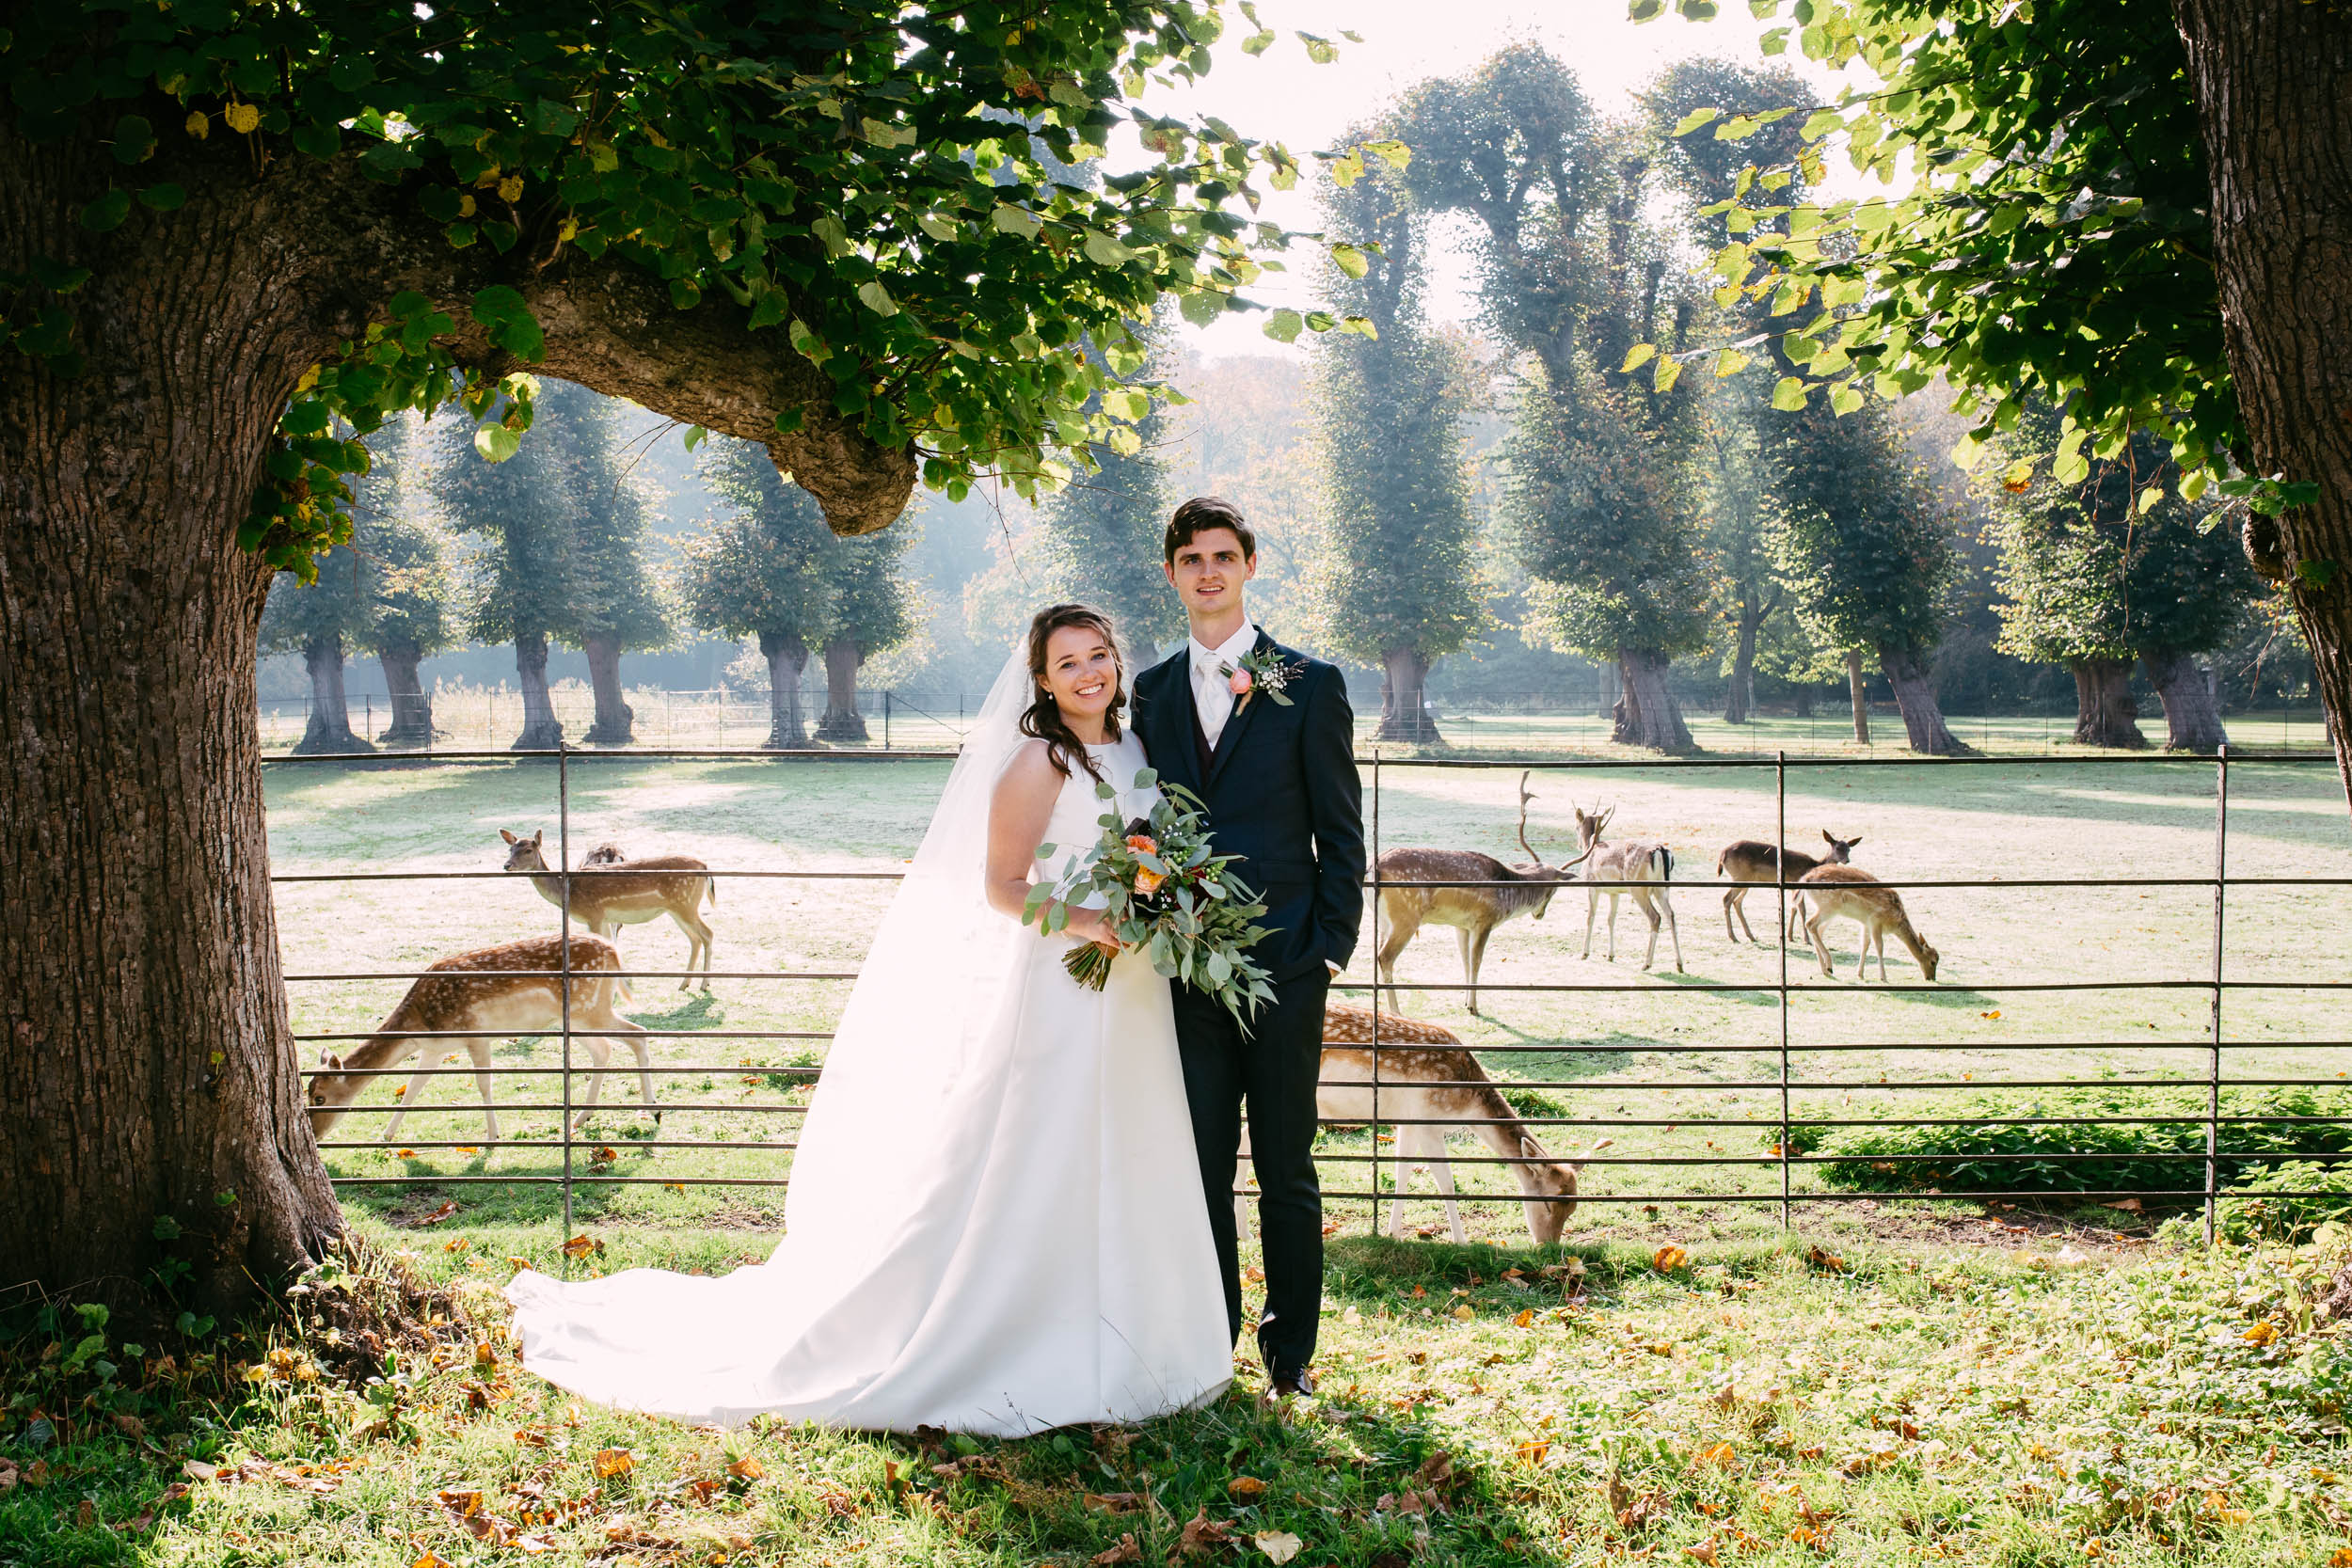 A bride and groom standing in the Orangerie Elswout with deer.